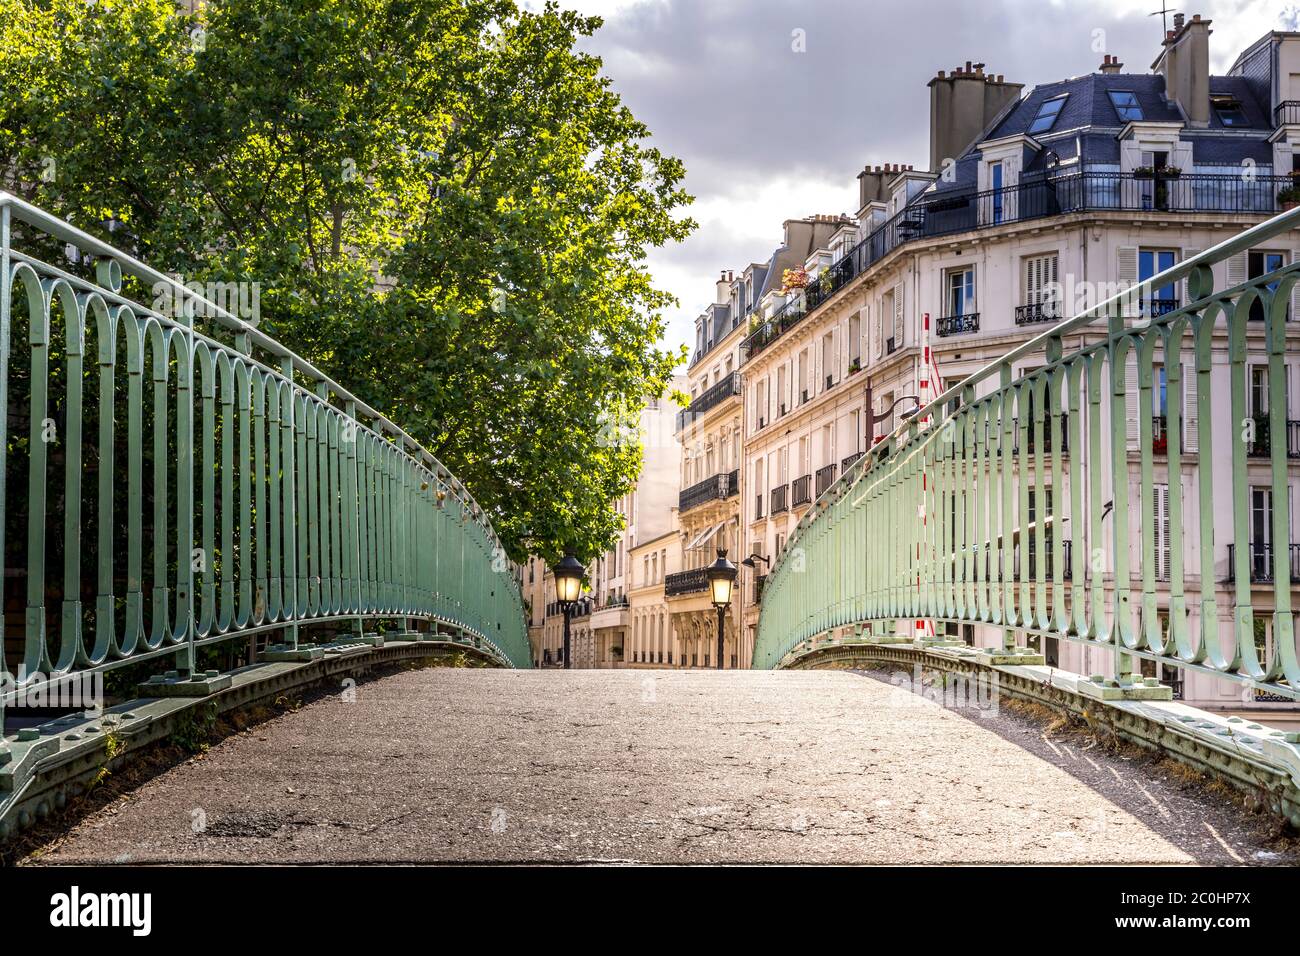 Paris, France - May 25, 2020: Iconic bridge of the Canal Saint-Martin in Paris France, a popular destination for Parisians, tourists and students on a Stock Photo